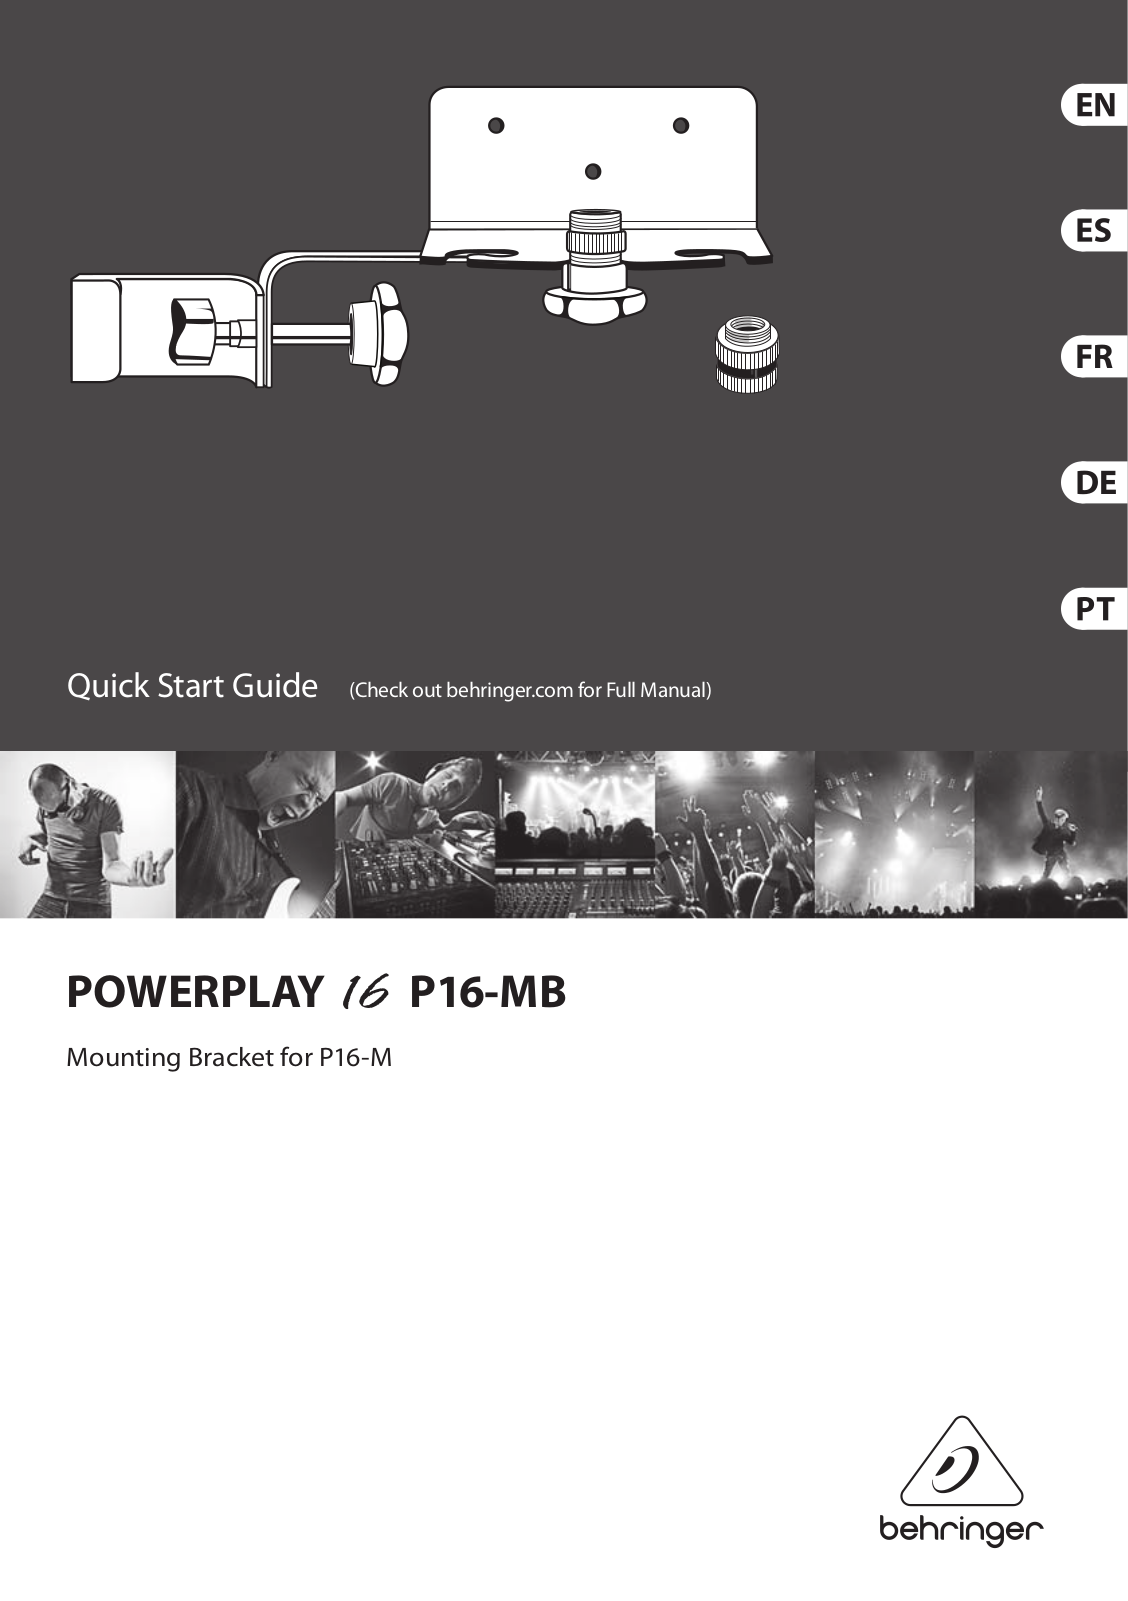 Behringer POWERPLAY 16 P16-MB Quick Start Guide